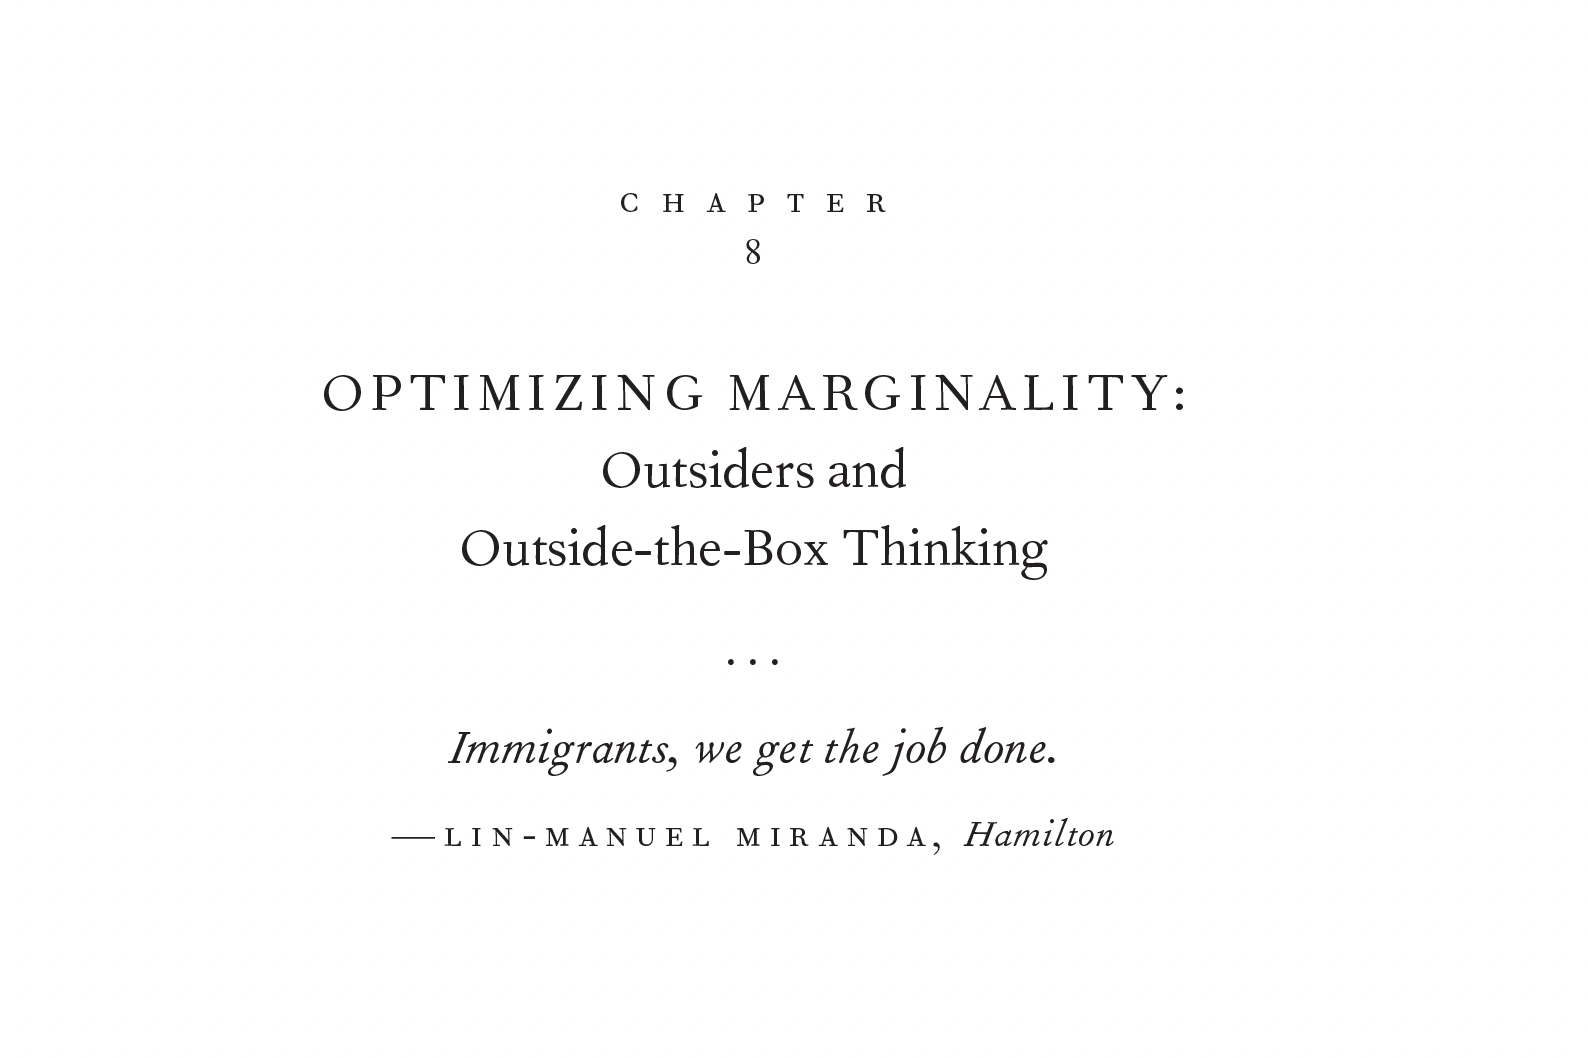 An intro page for Chapter 8, titled "Optimizing Marginality: Outsiders and Outside-the-Box Thinking." Below that, a quote from Lin-Manuel Miranda: "Immigrants, we get the job done."